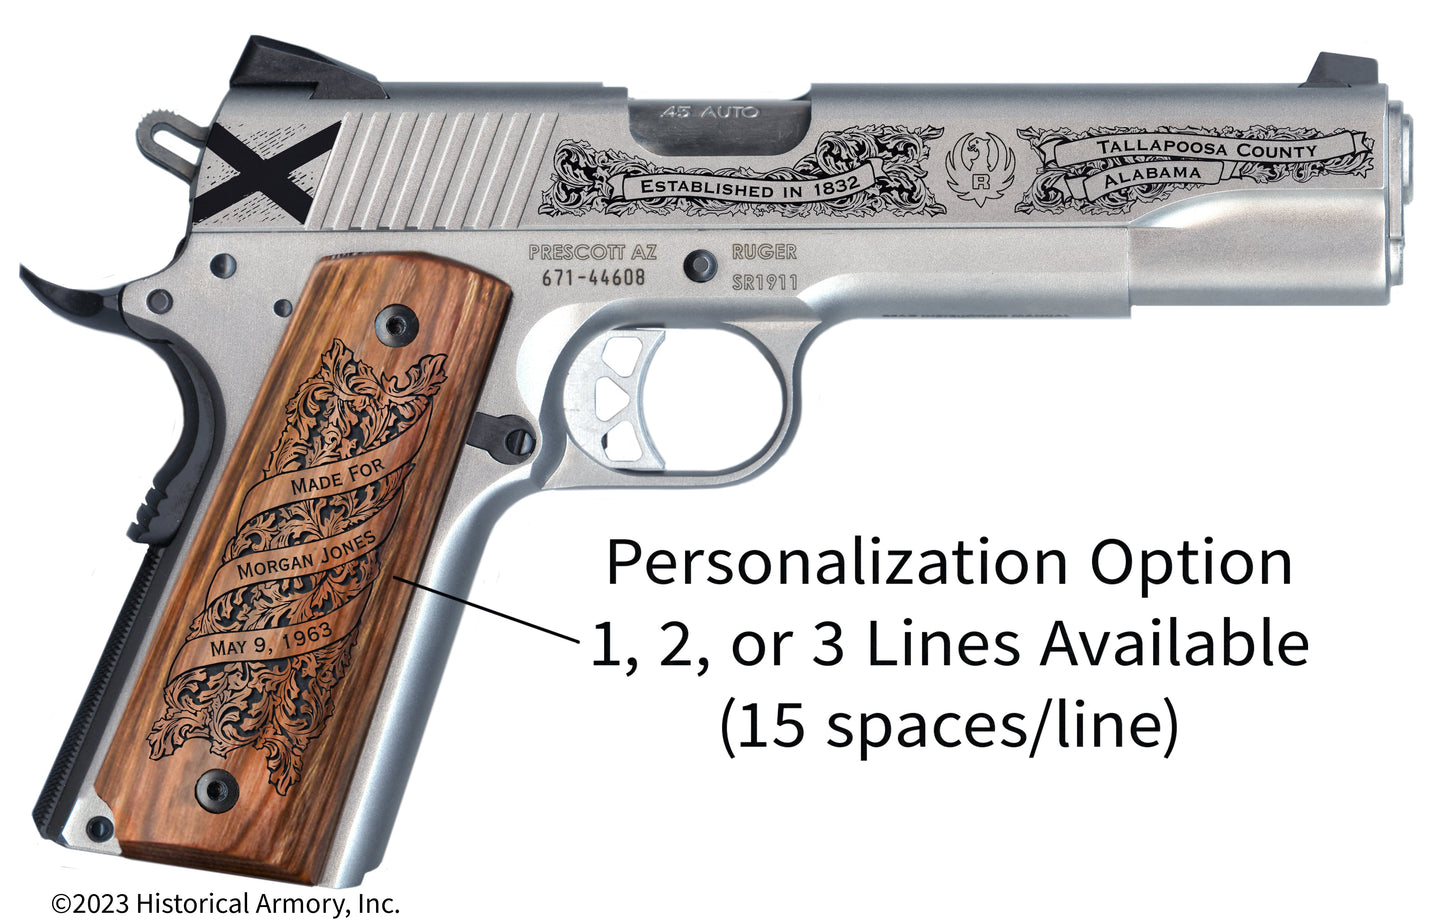 Tallapoosa County Alabama Personalized Engraved .45 Auto Ruger 1911